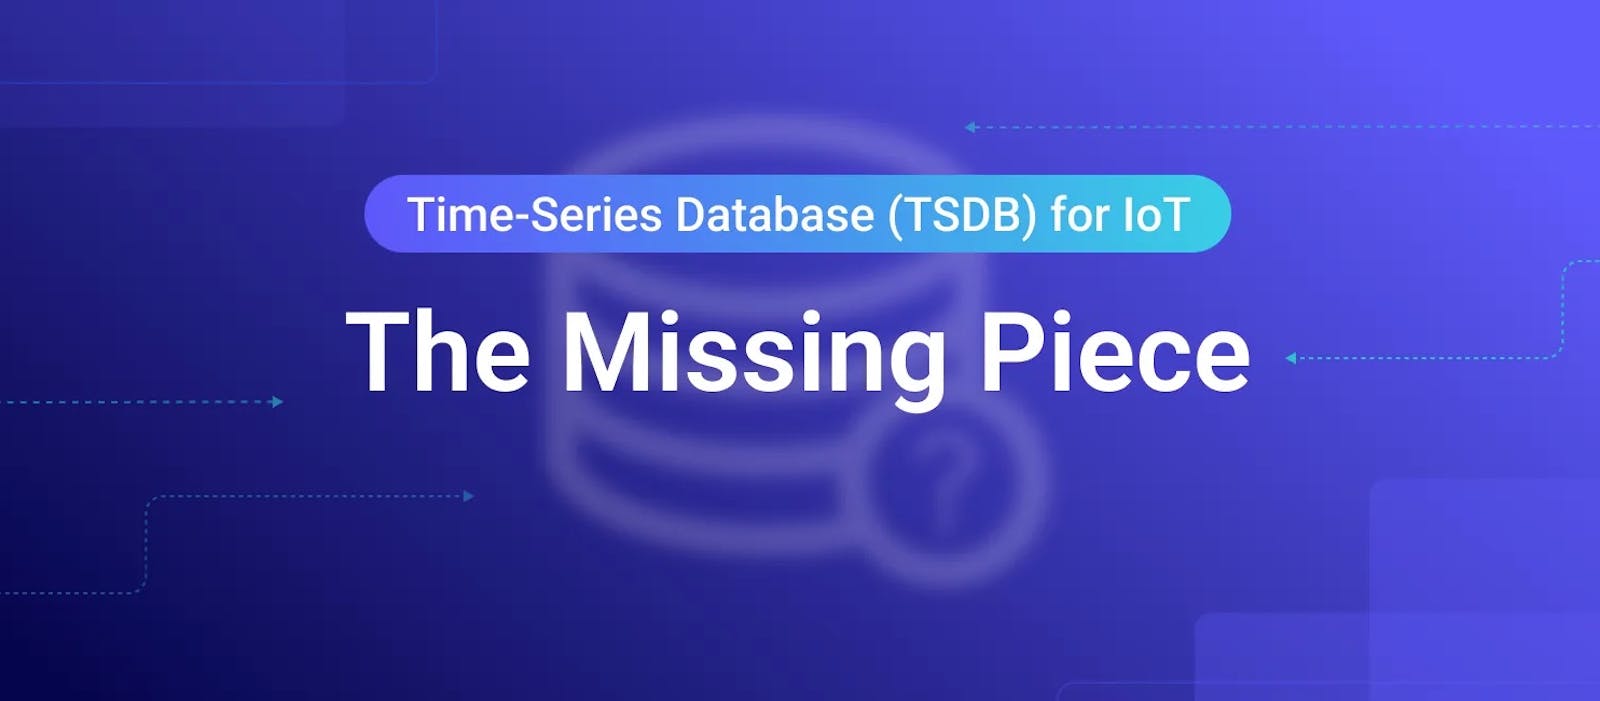 Time-Series Database (TSDB) for IoT: The Missing Piece